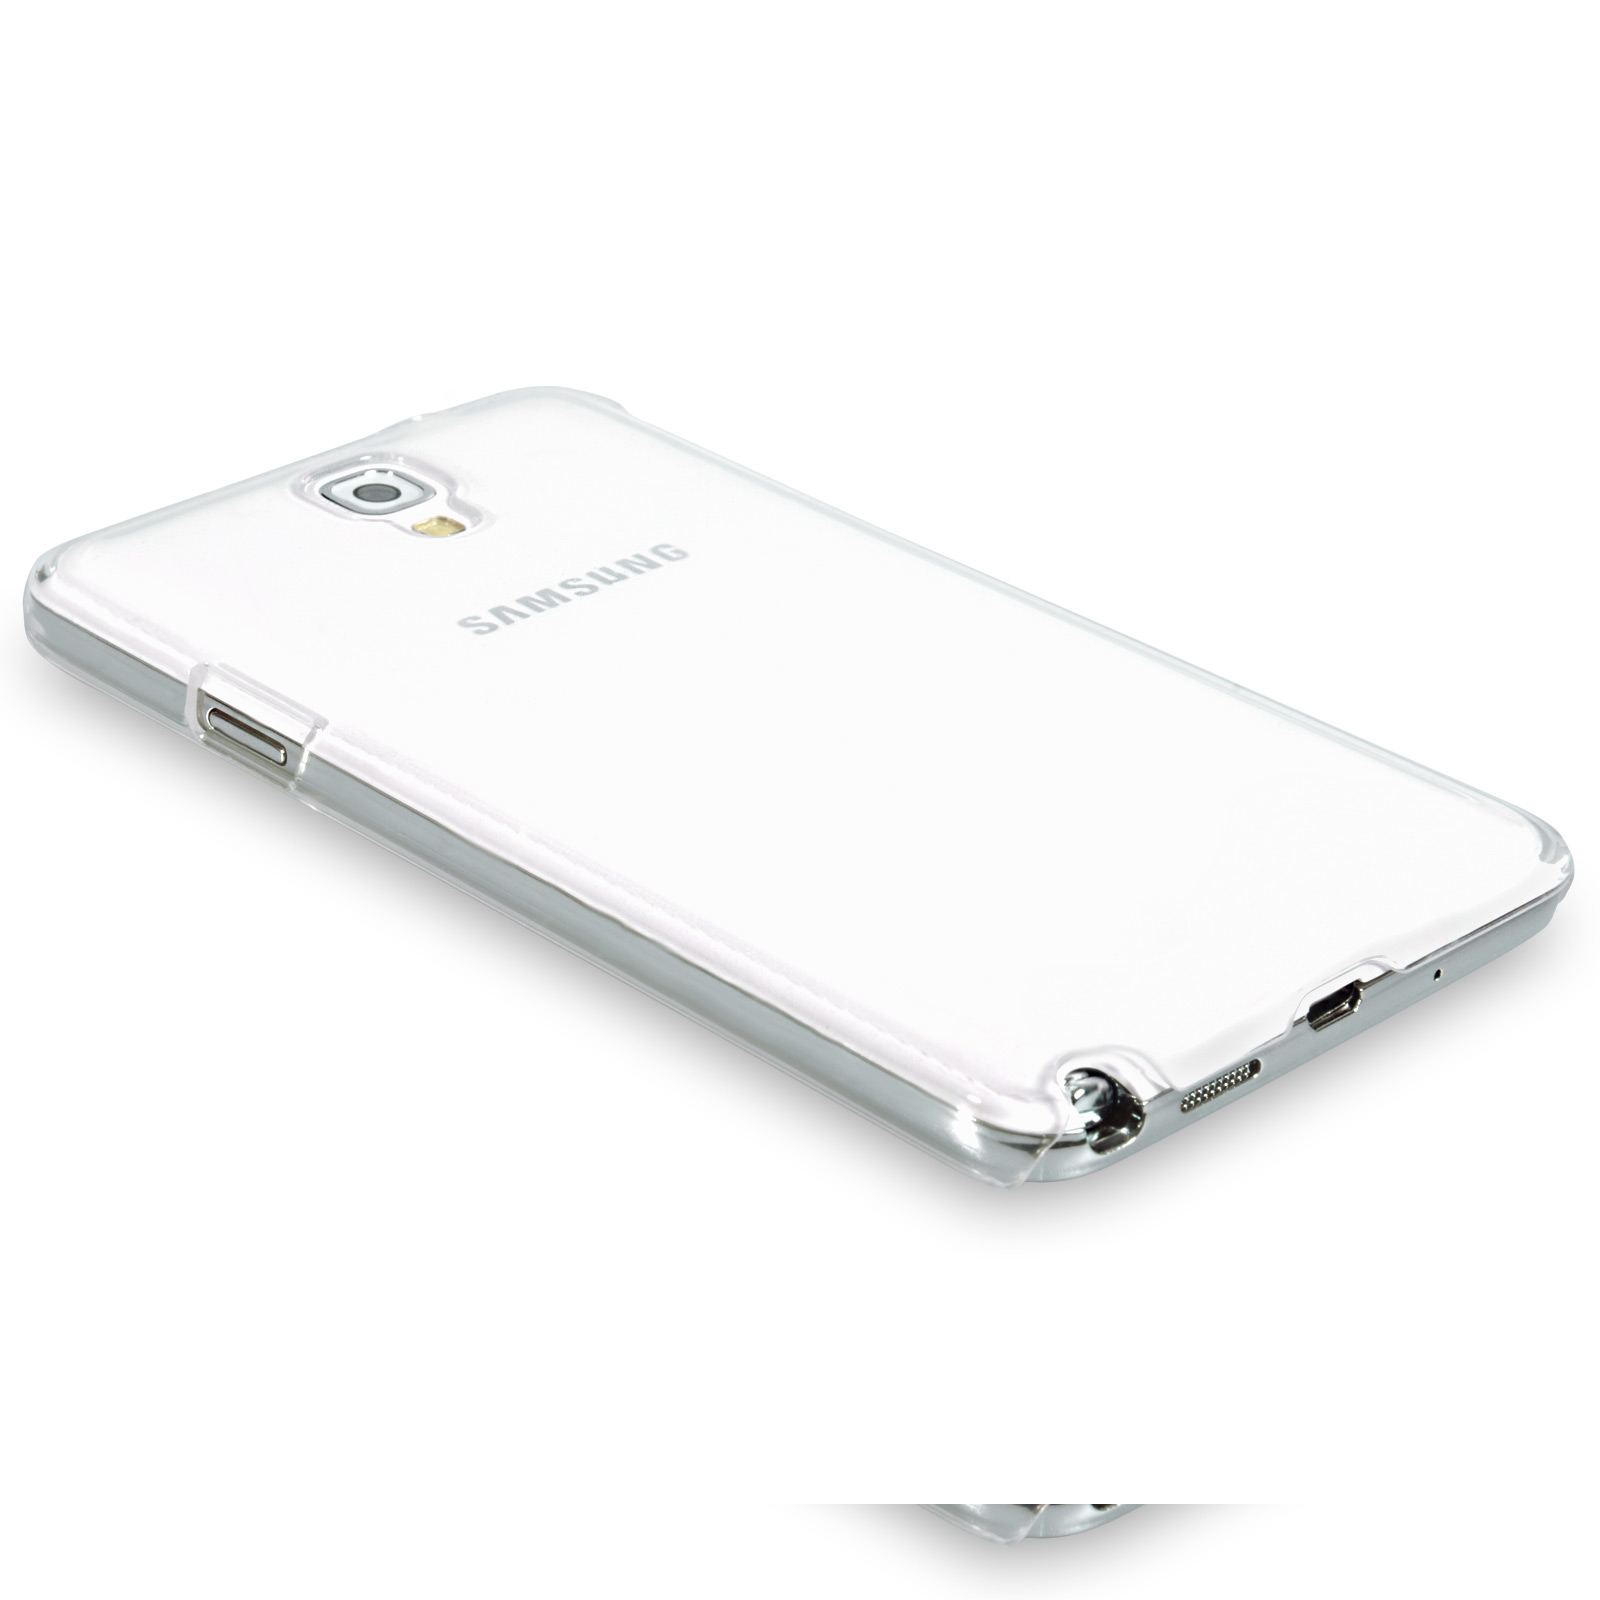 YouSave Samsung Galaxy Note 3 Neo Hard Case - Crystal Clear